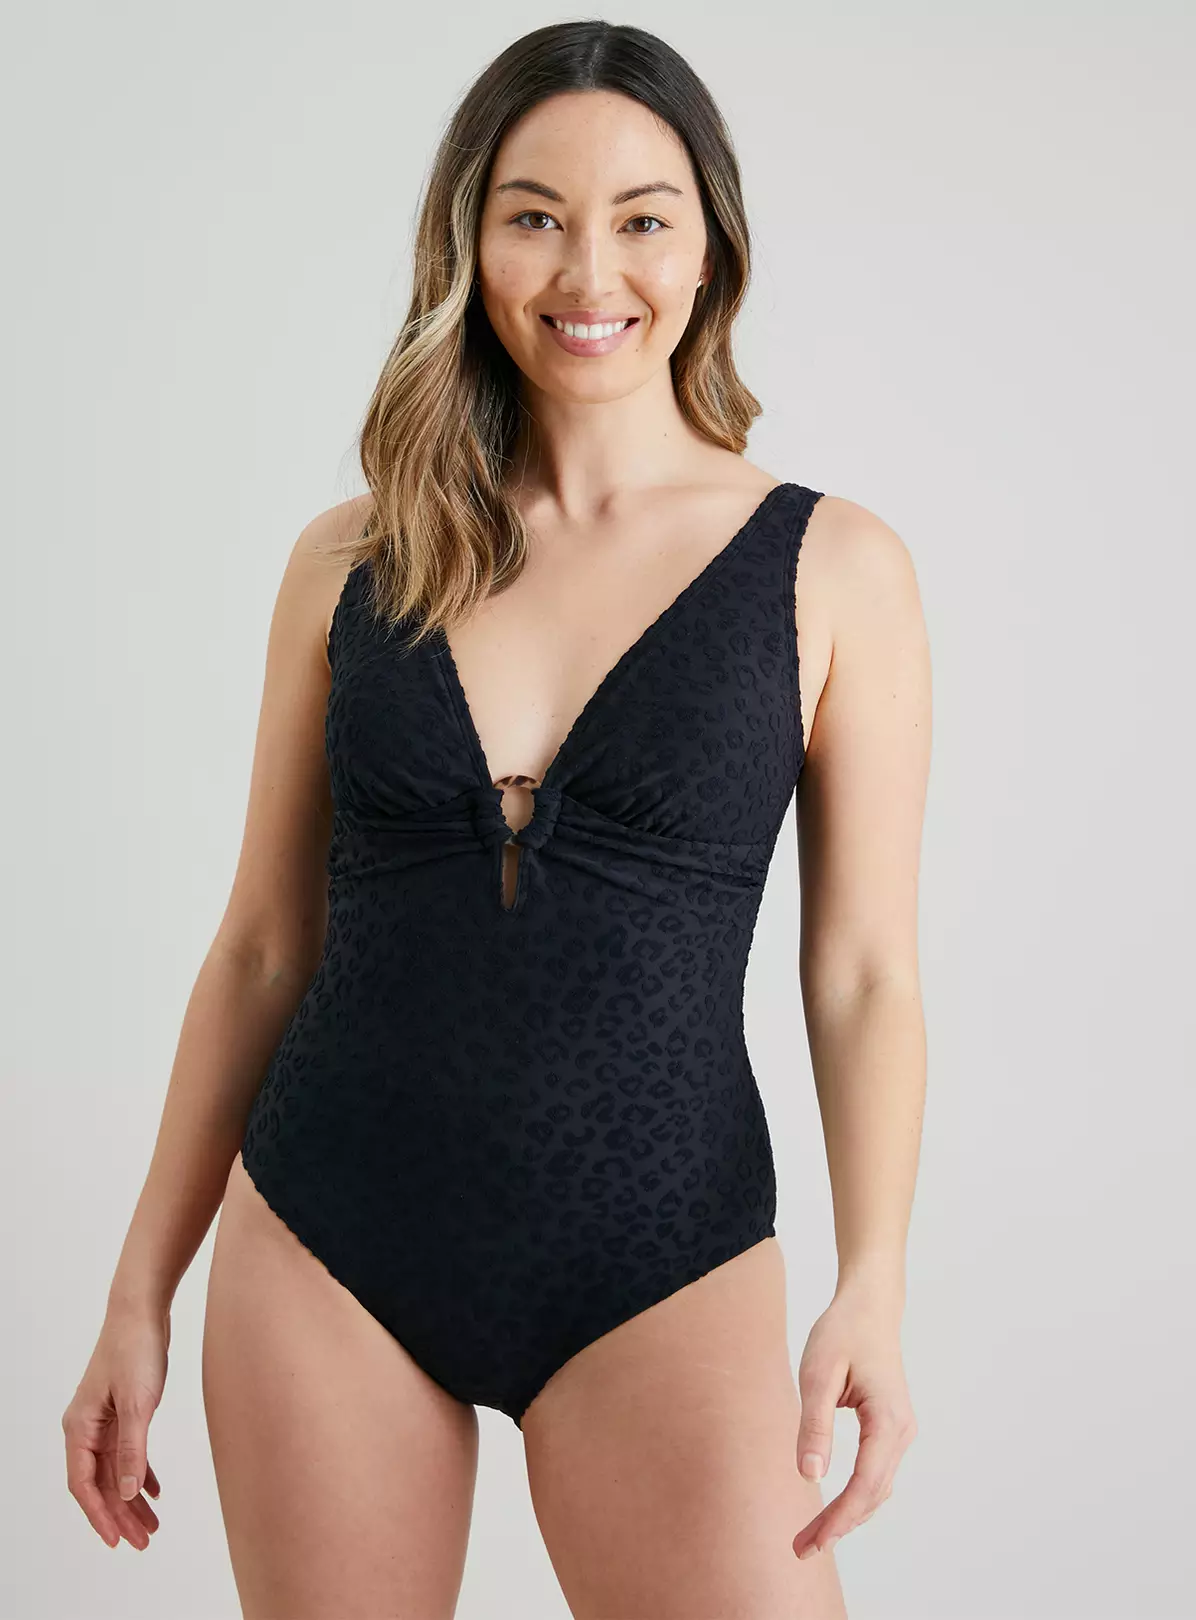 Black Textured Animal Print Swimsuit from Tu Clothing